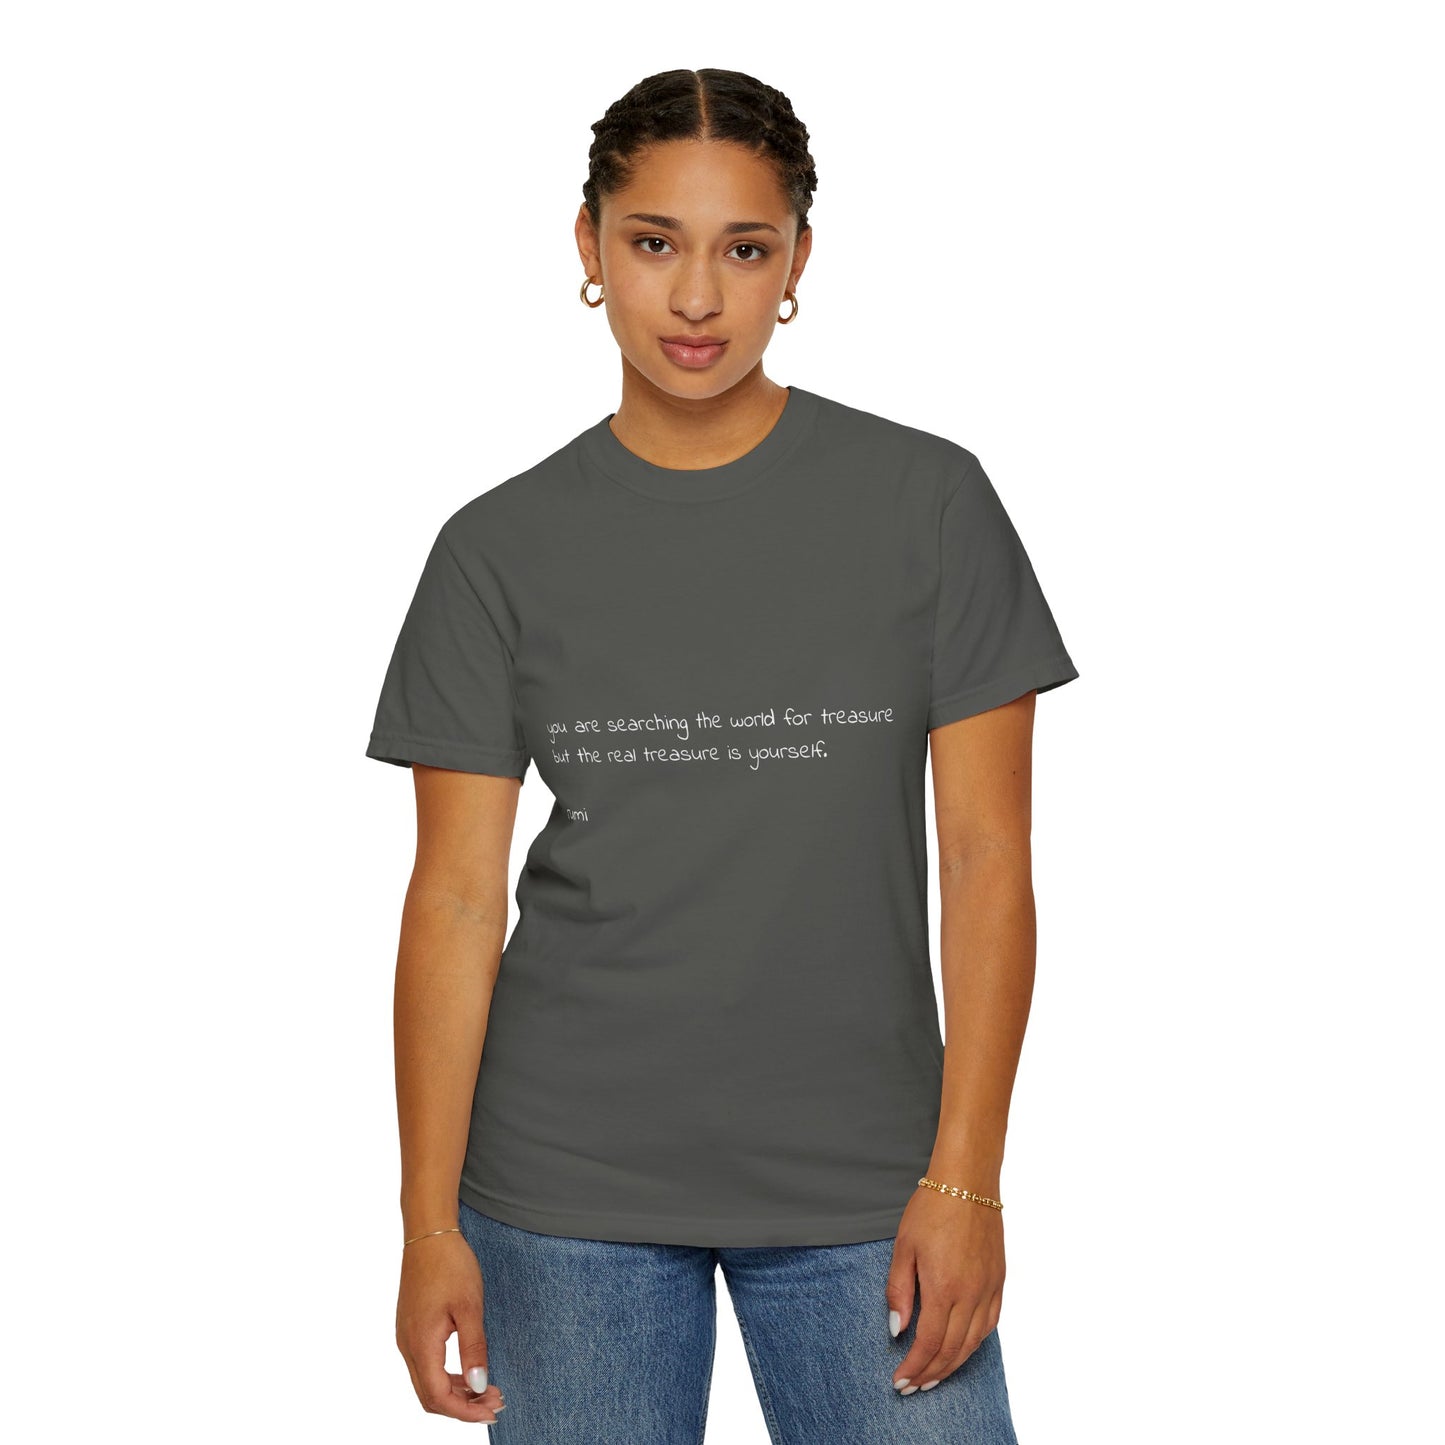 Rumi quote Garment-Dyed T-shirt